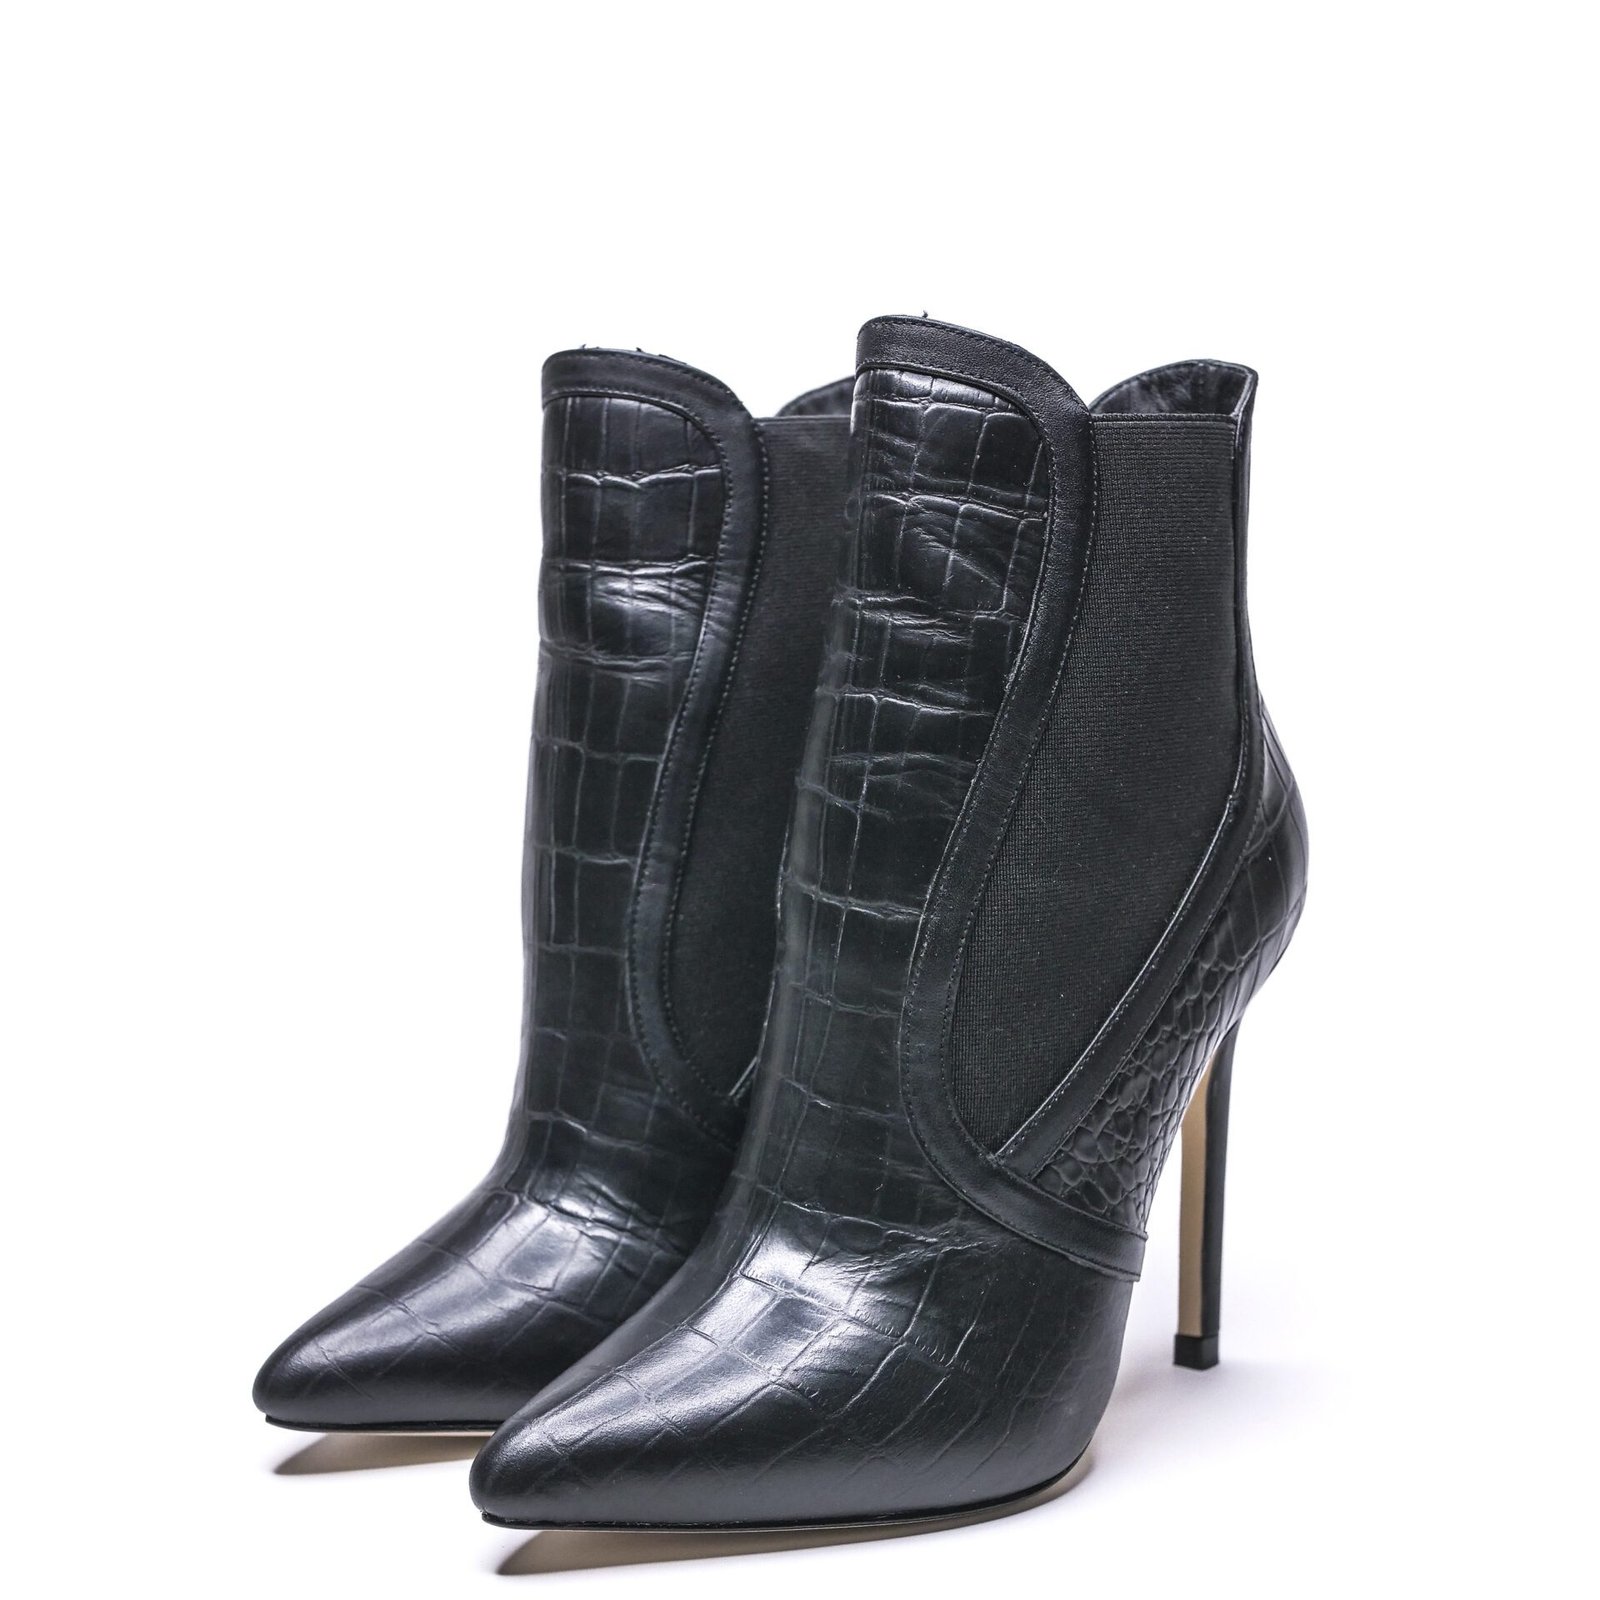 pointed-toe black boots